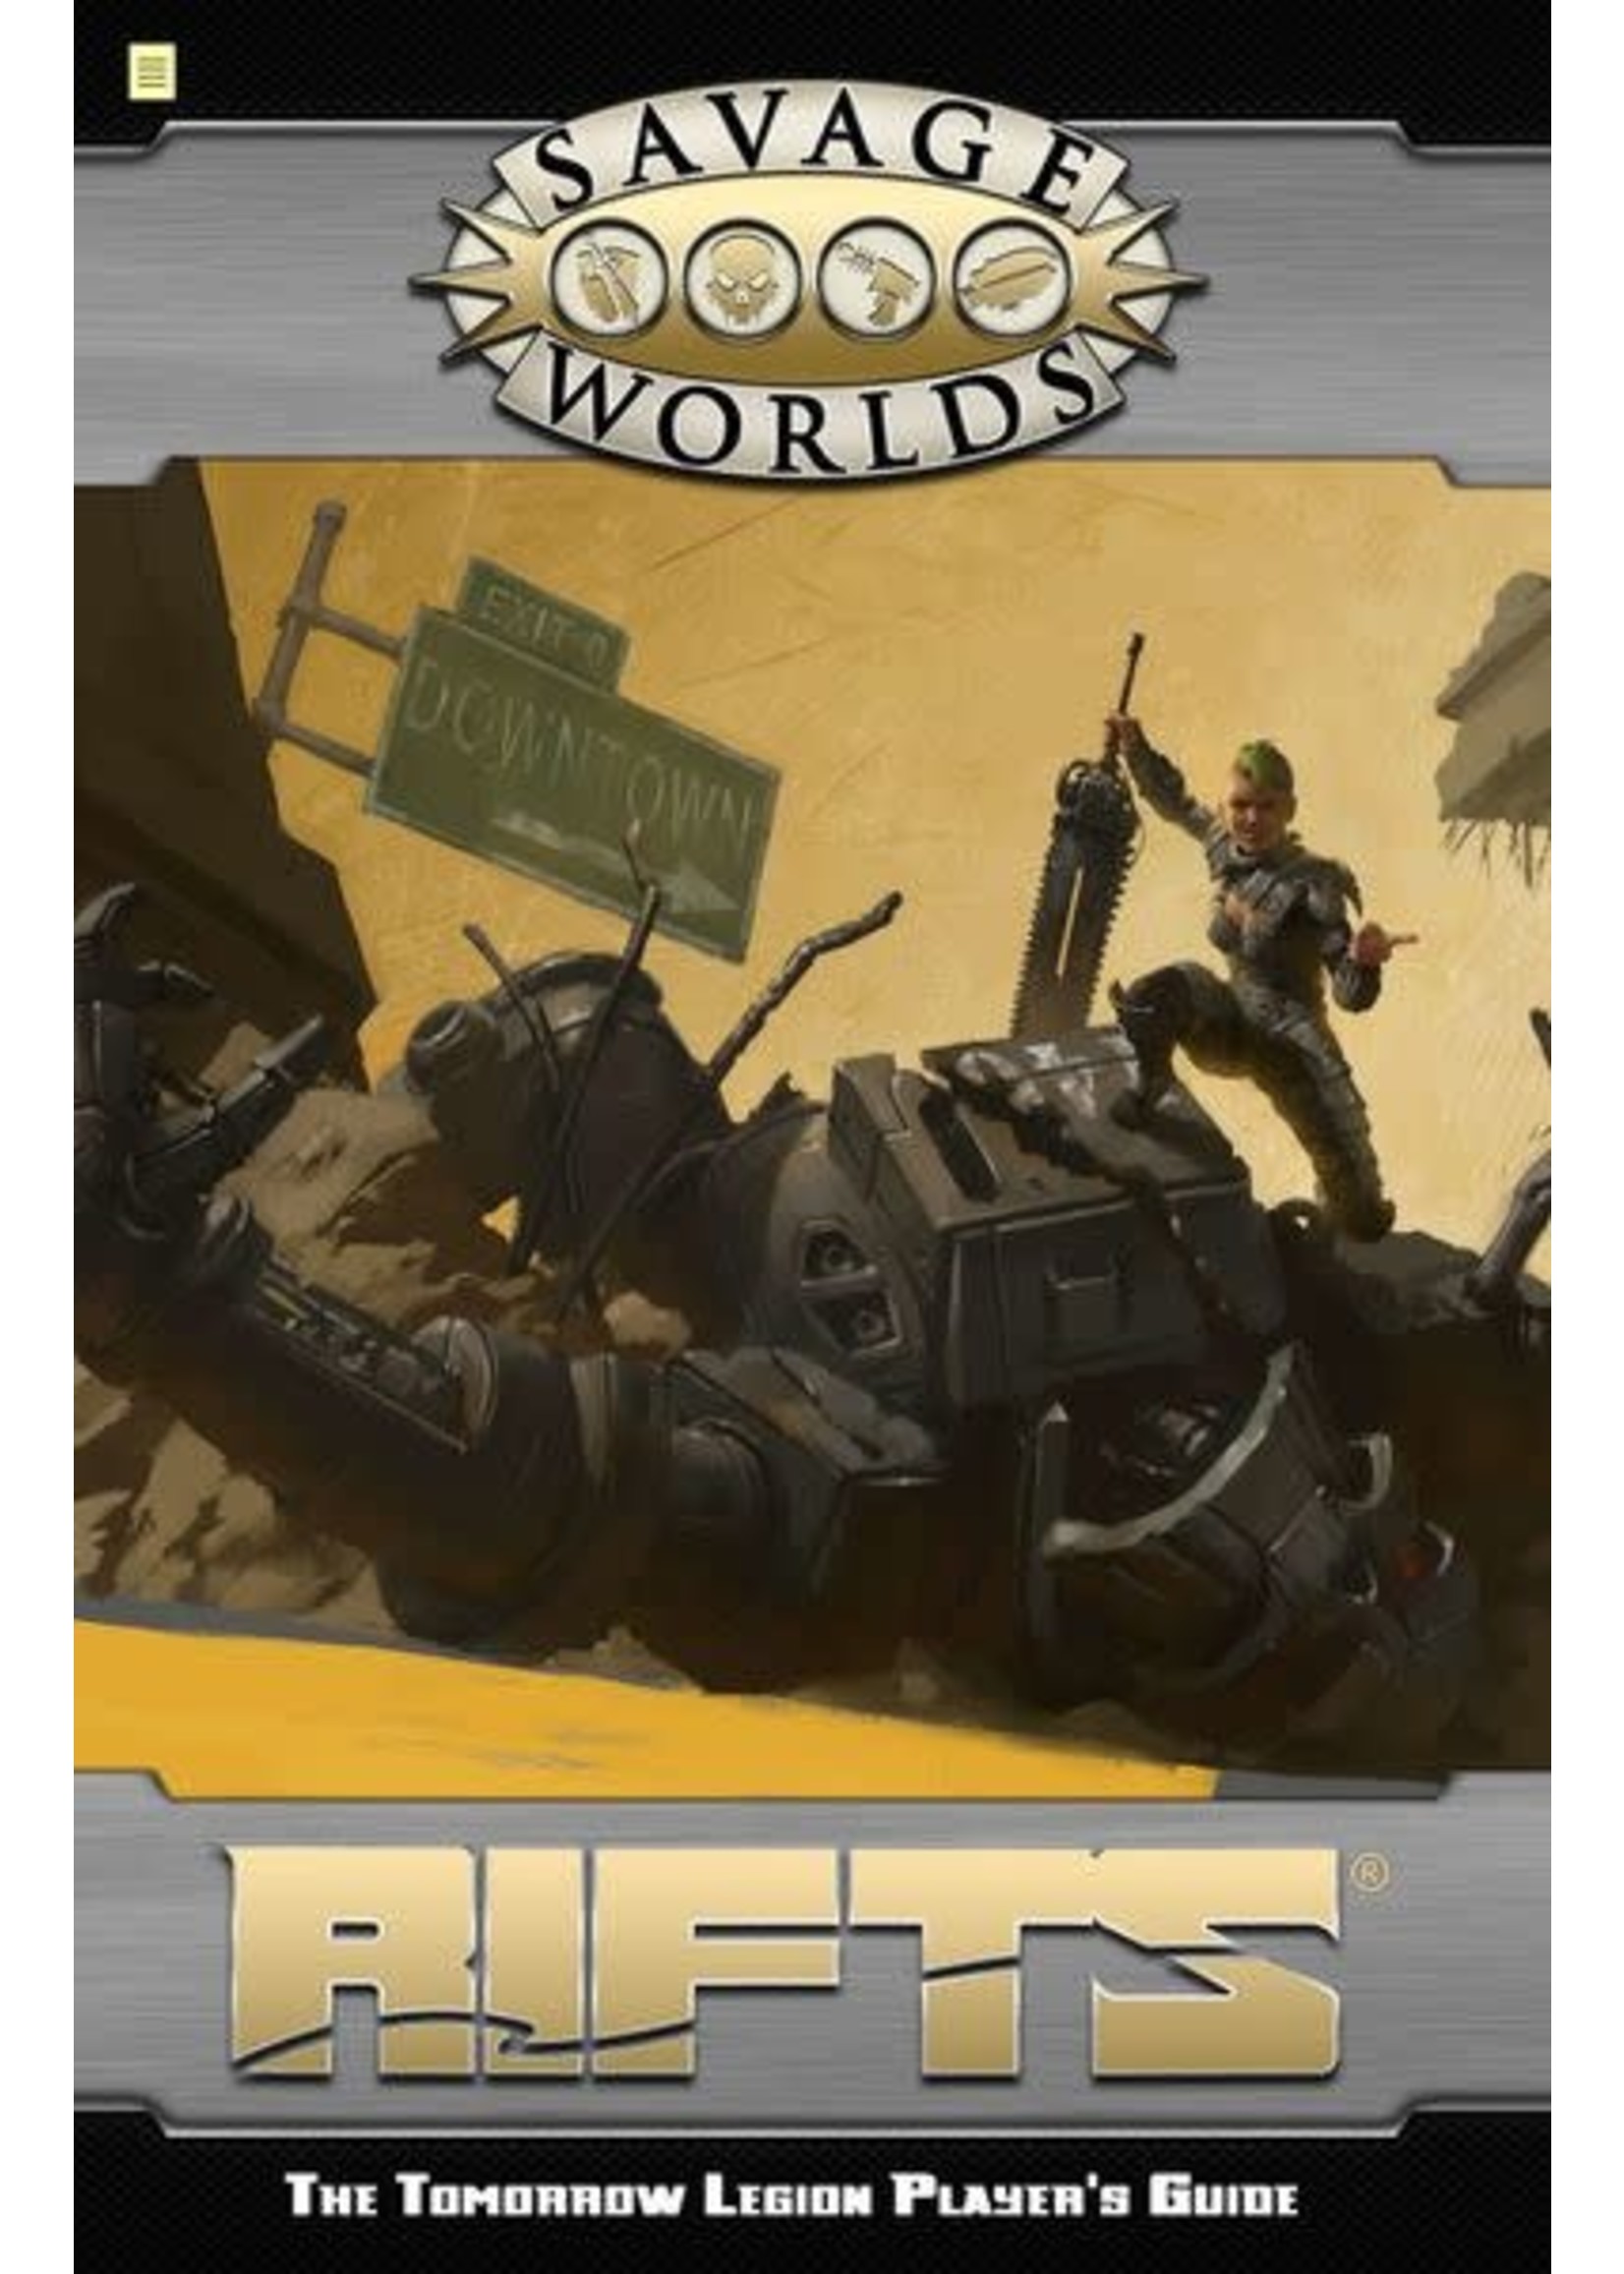 Studio 2 Publishing Savage Worlds: Rifts - The Tomorrow Legion Player's Guide